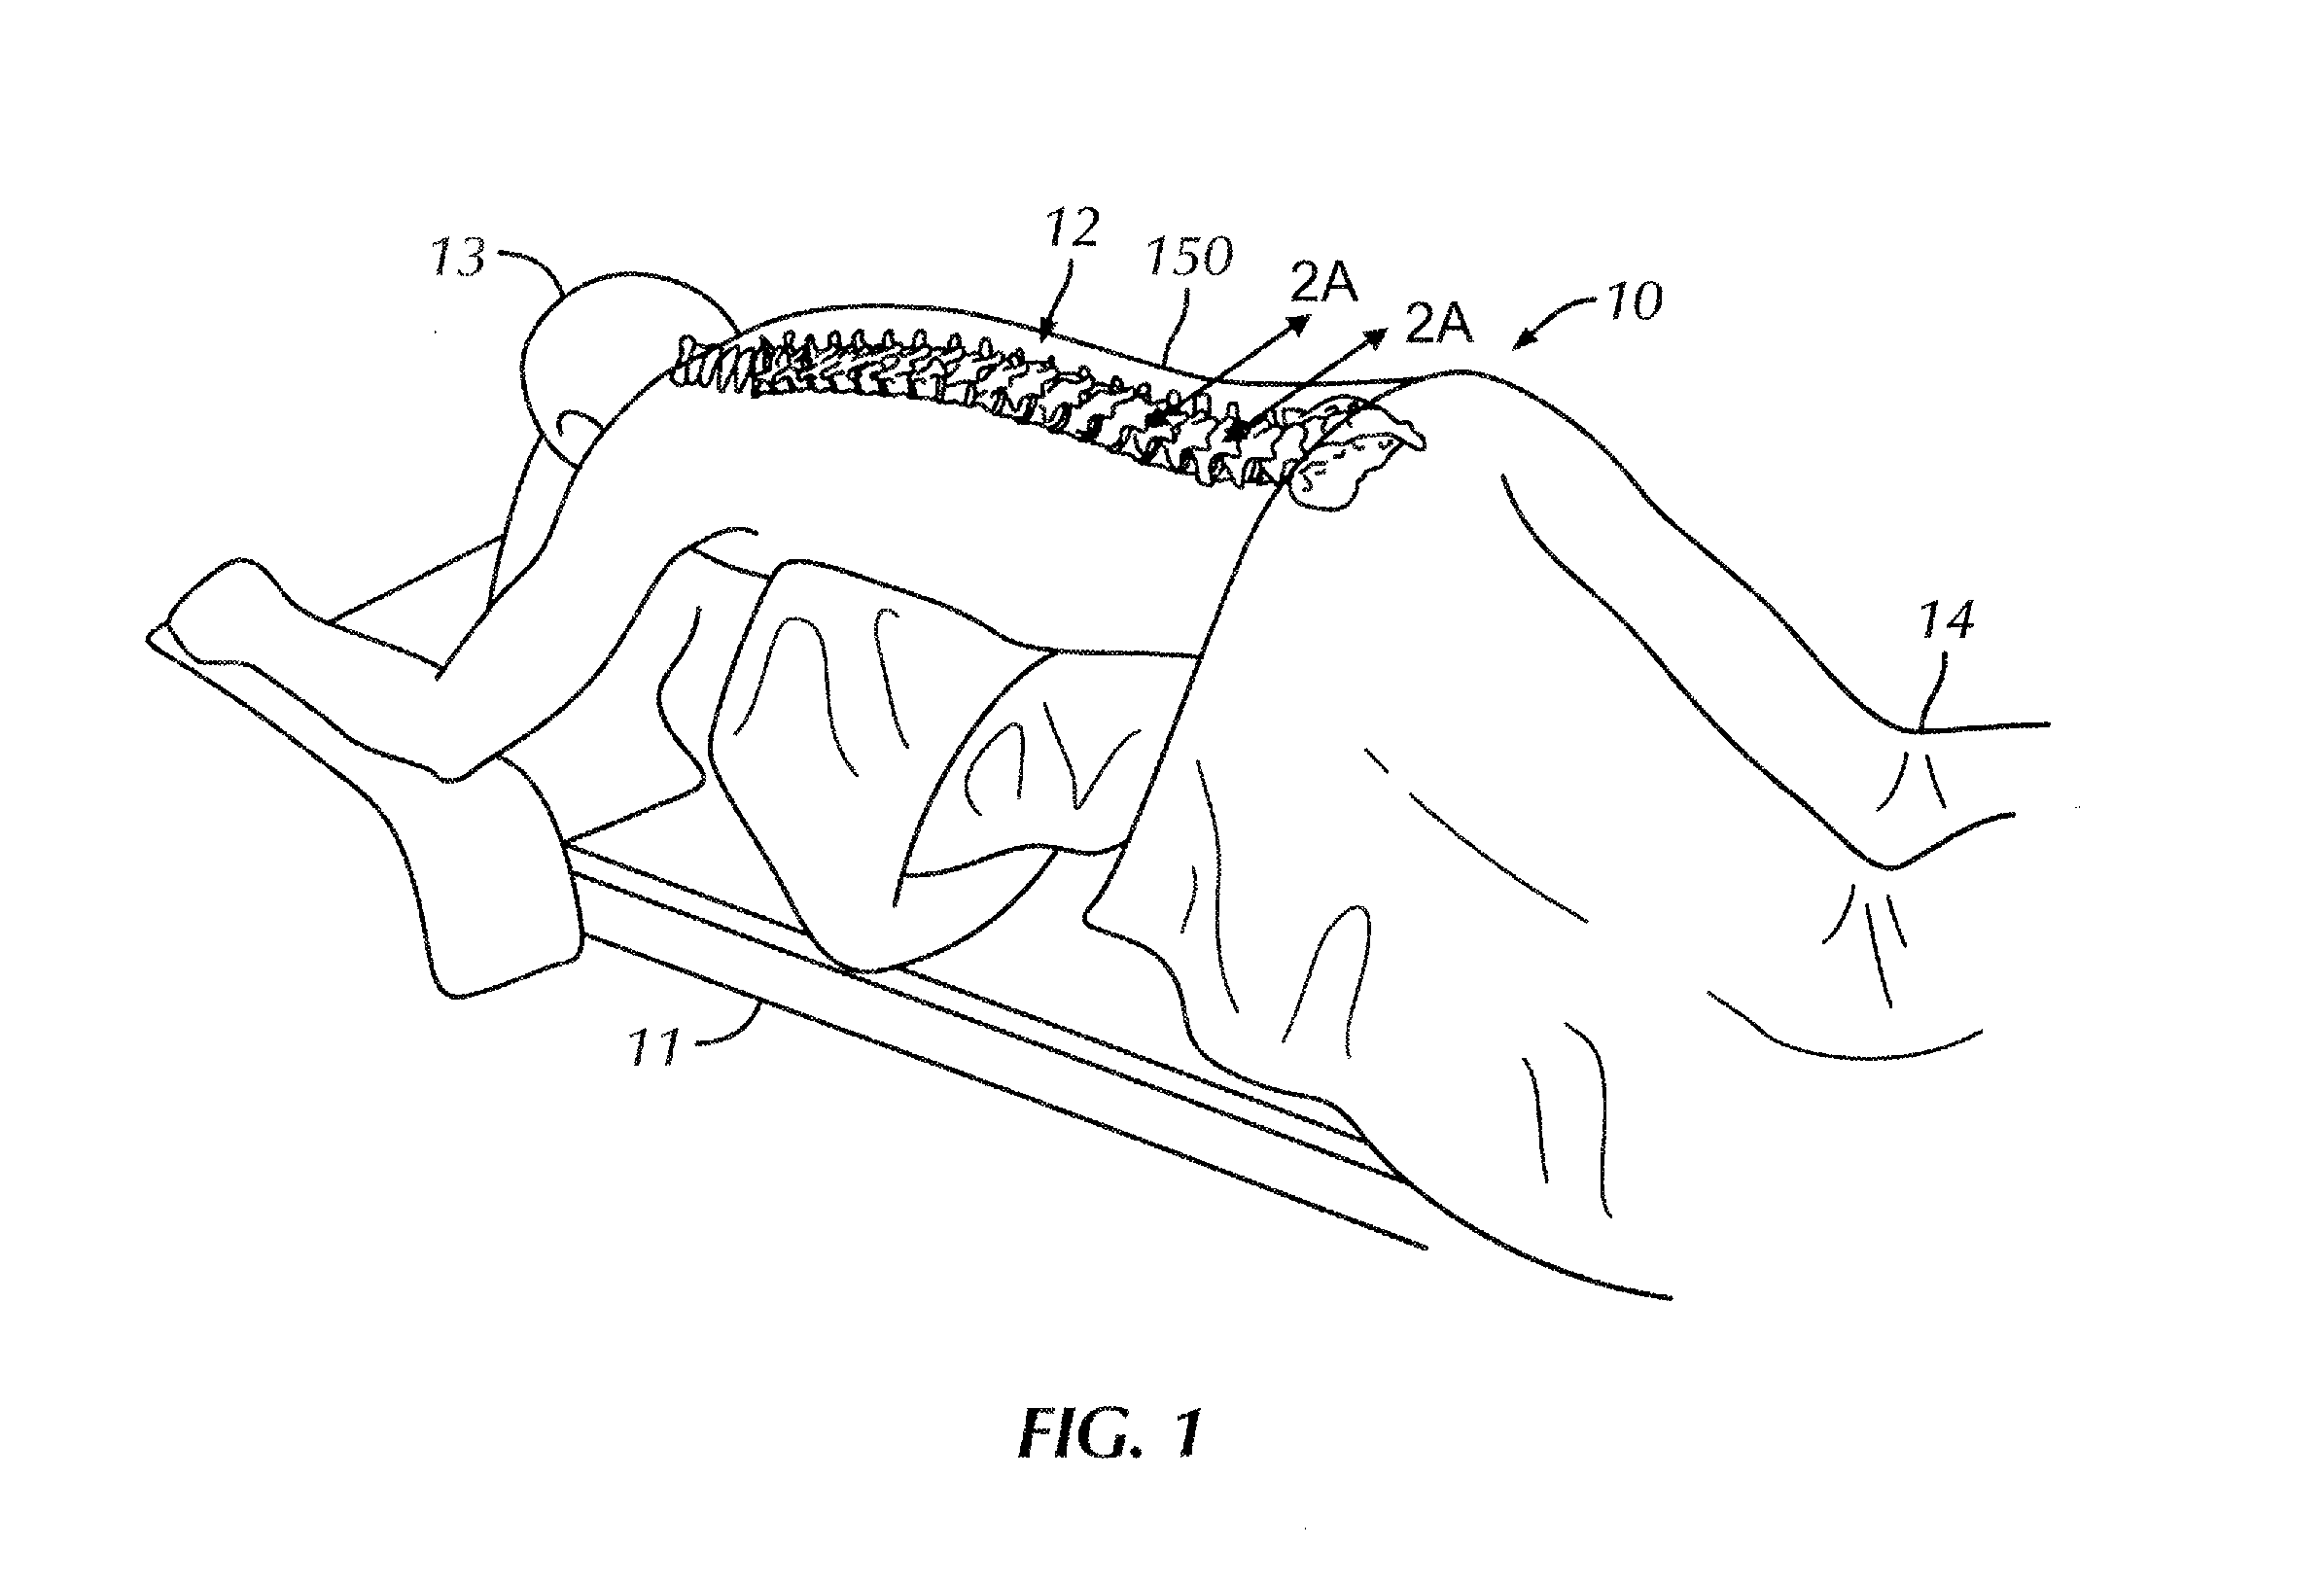 Surgical instrument system and method for providing retraction and vertebral distraction